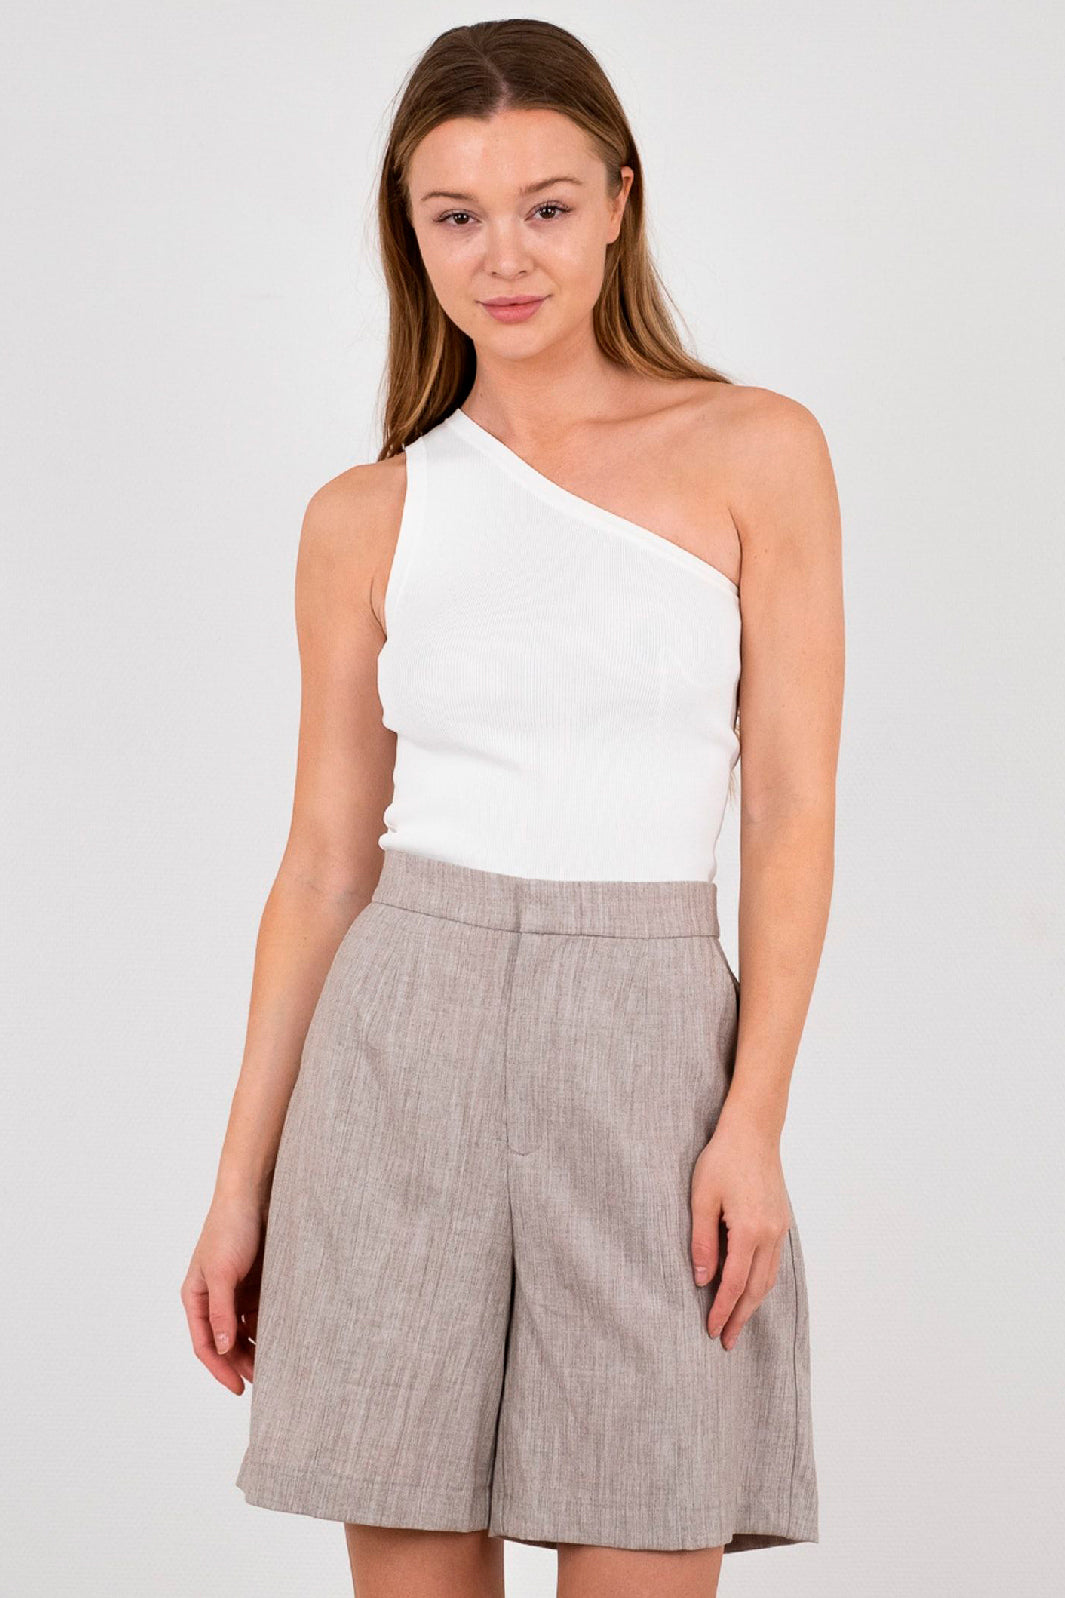 Neo Noir - Clementine Knitted Top - White Toppe 